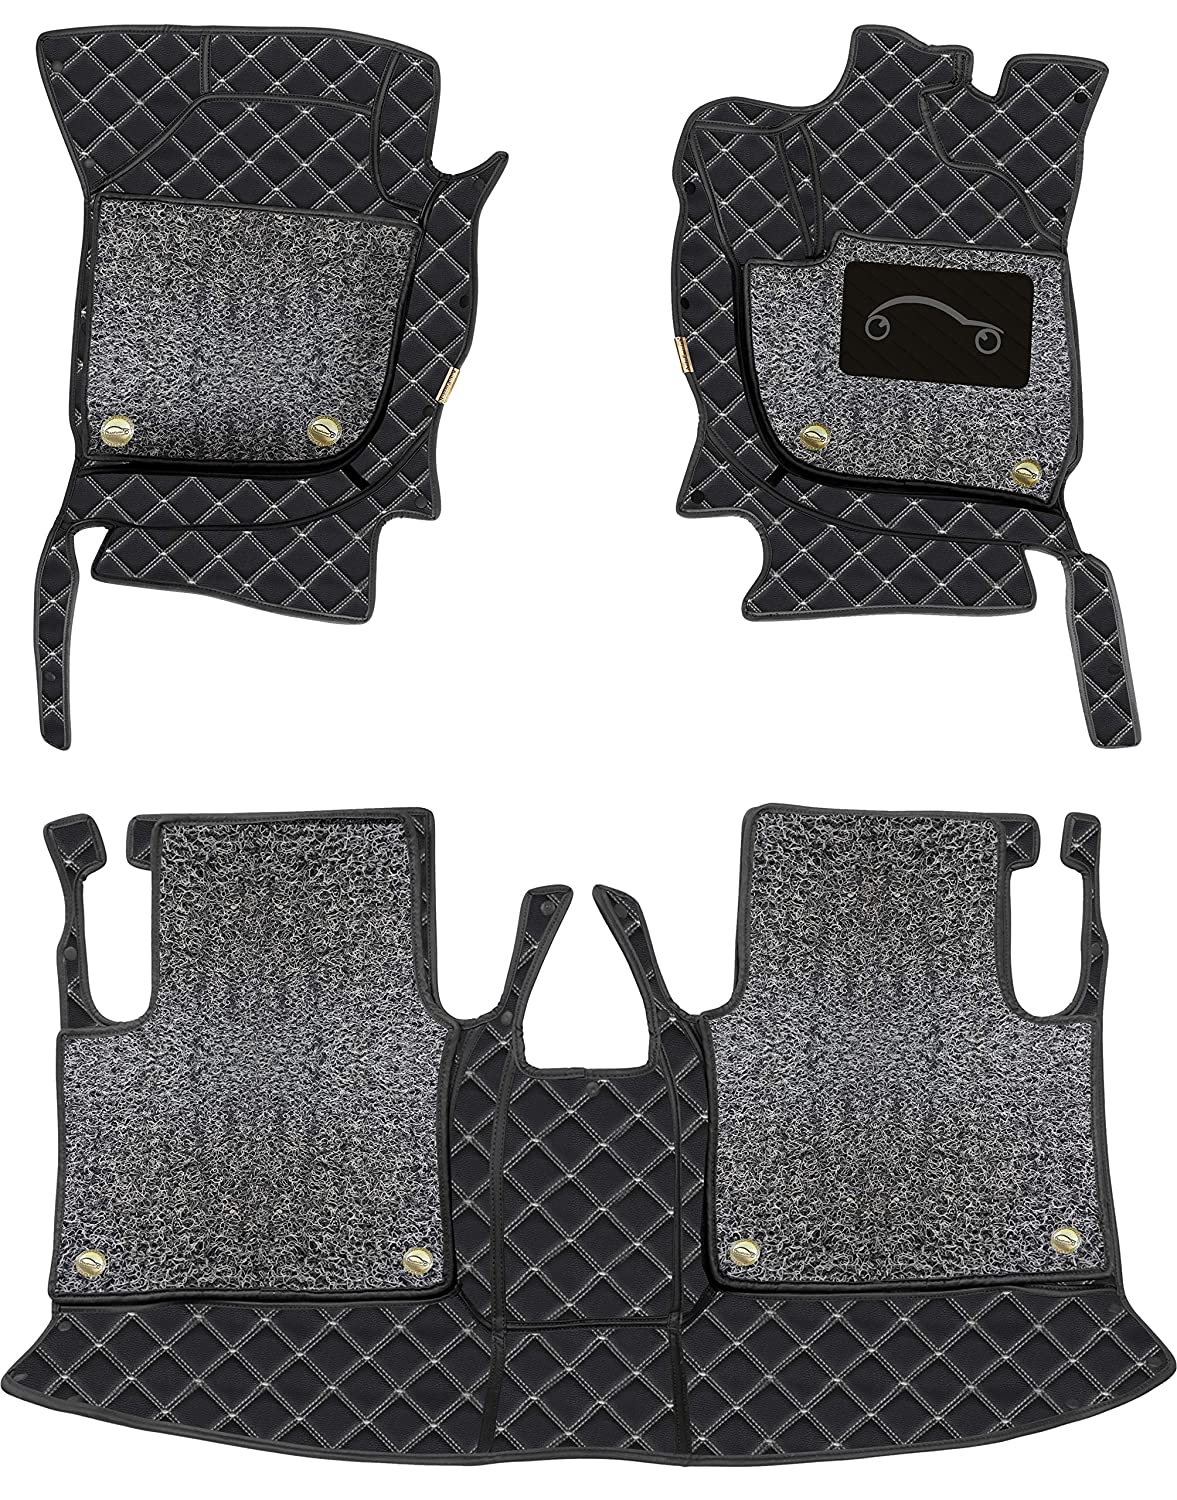 Mercedes GLC 300 2023-7D Luxury Car Mat, All Weather Proof, Anti-Skid, 100% Waterproof & Odorless with Unique Diamond Fish Design (24mm Luxury PU Leather, 2 Rows)